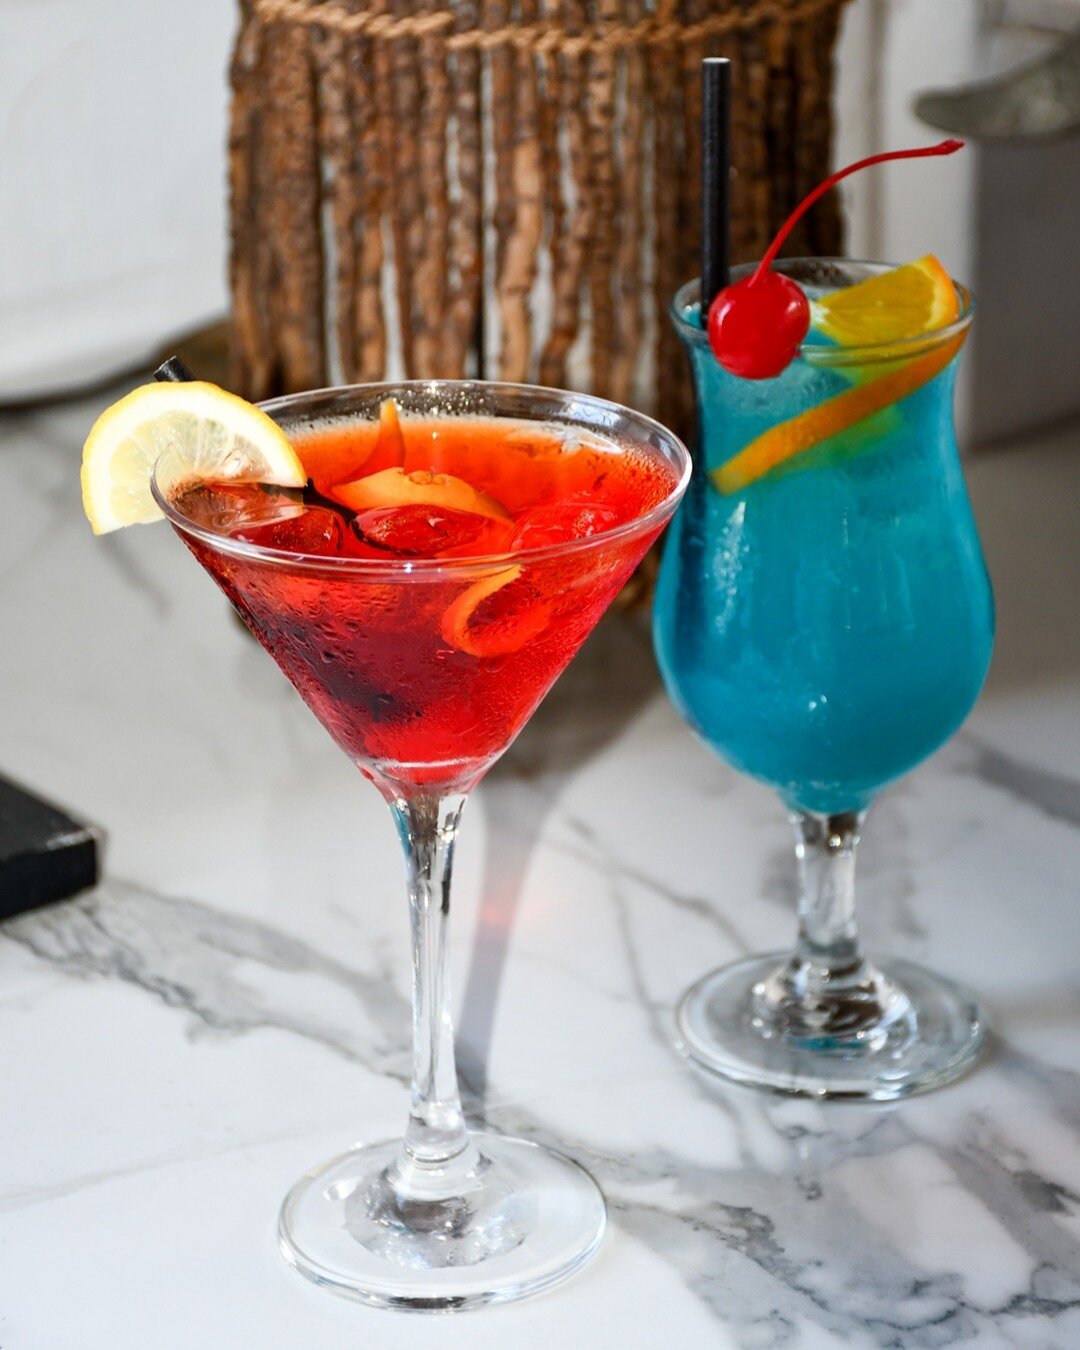 It's a tough choice, isn't it?

The Red Girl or the Bathsheba cocktail. Which will you choose? Let us know in the comments! 

Give us a call at (246) 232-9180, or use the link in our bio to reserve your table!

#meathouse #pub #barbados #restaurant #